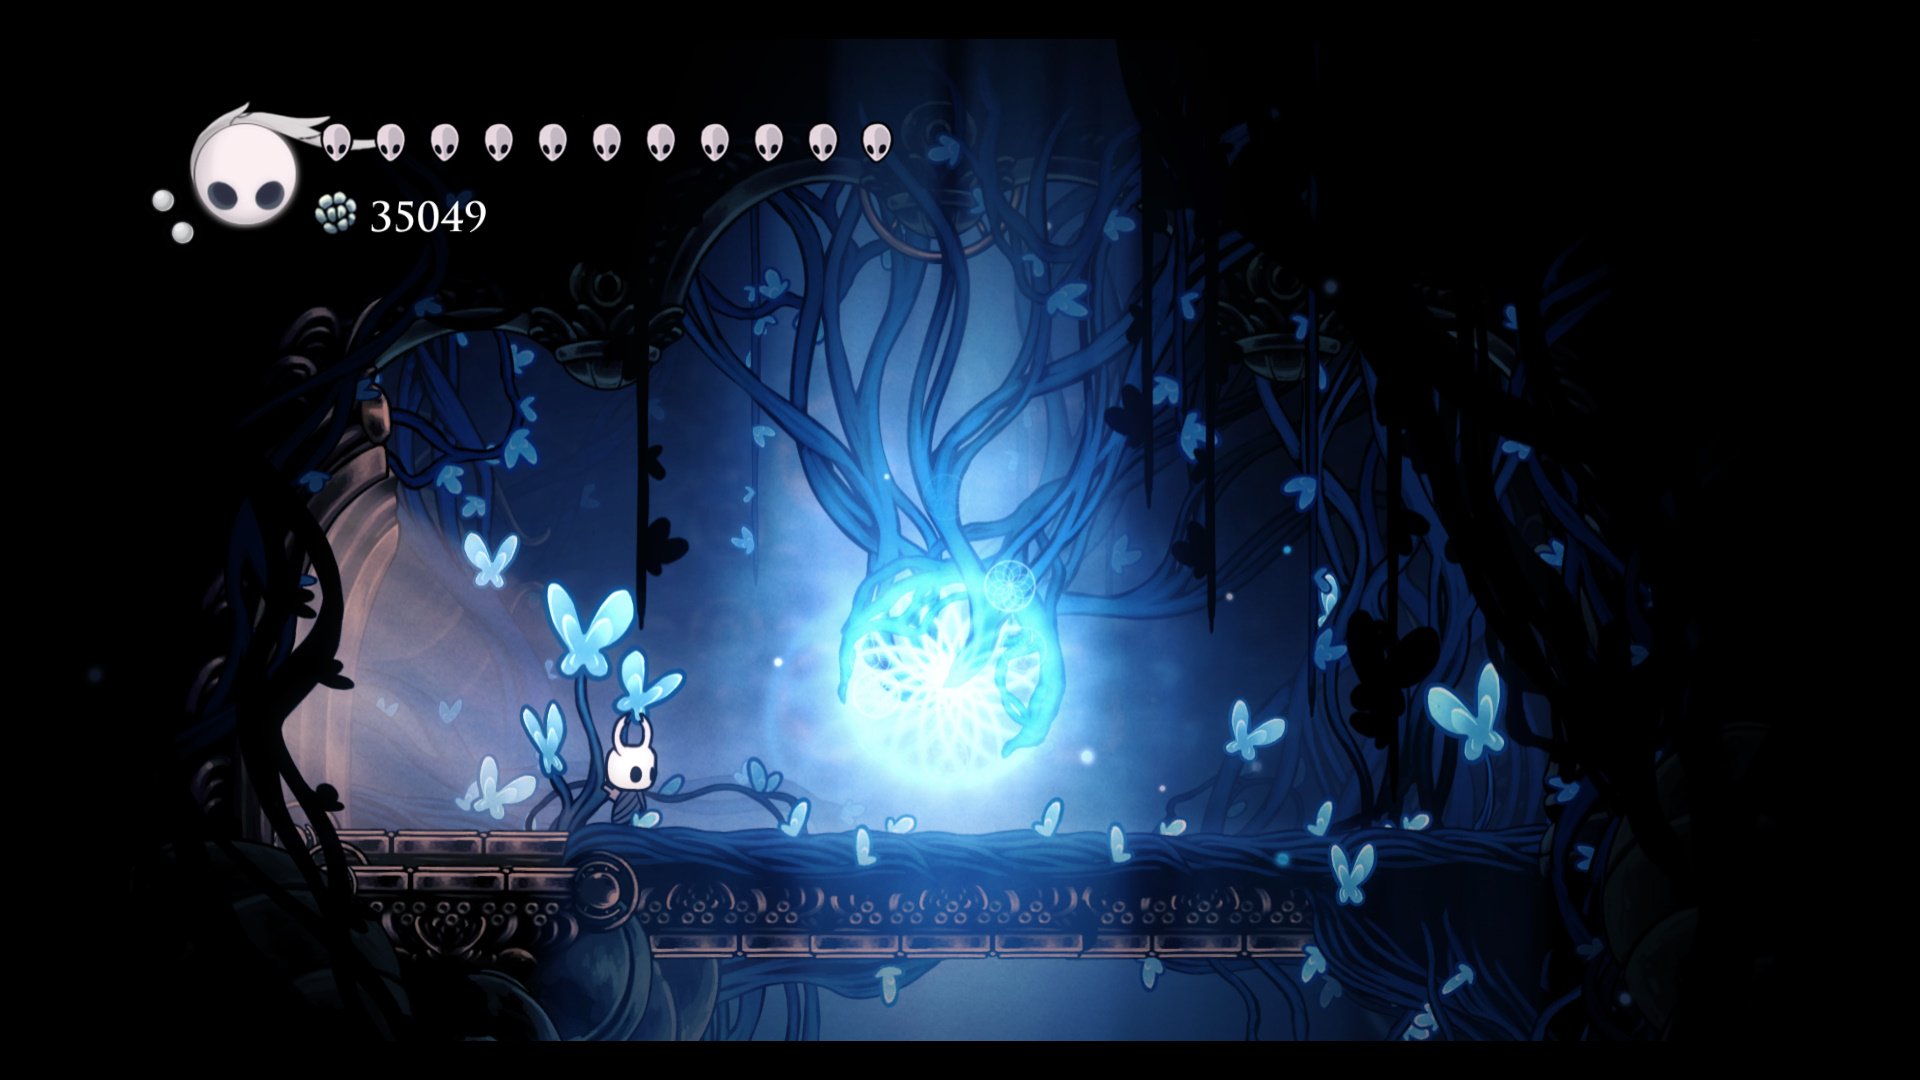 What should I do in the life blood room HollowKnight